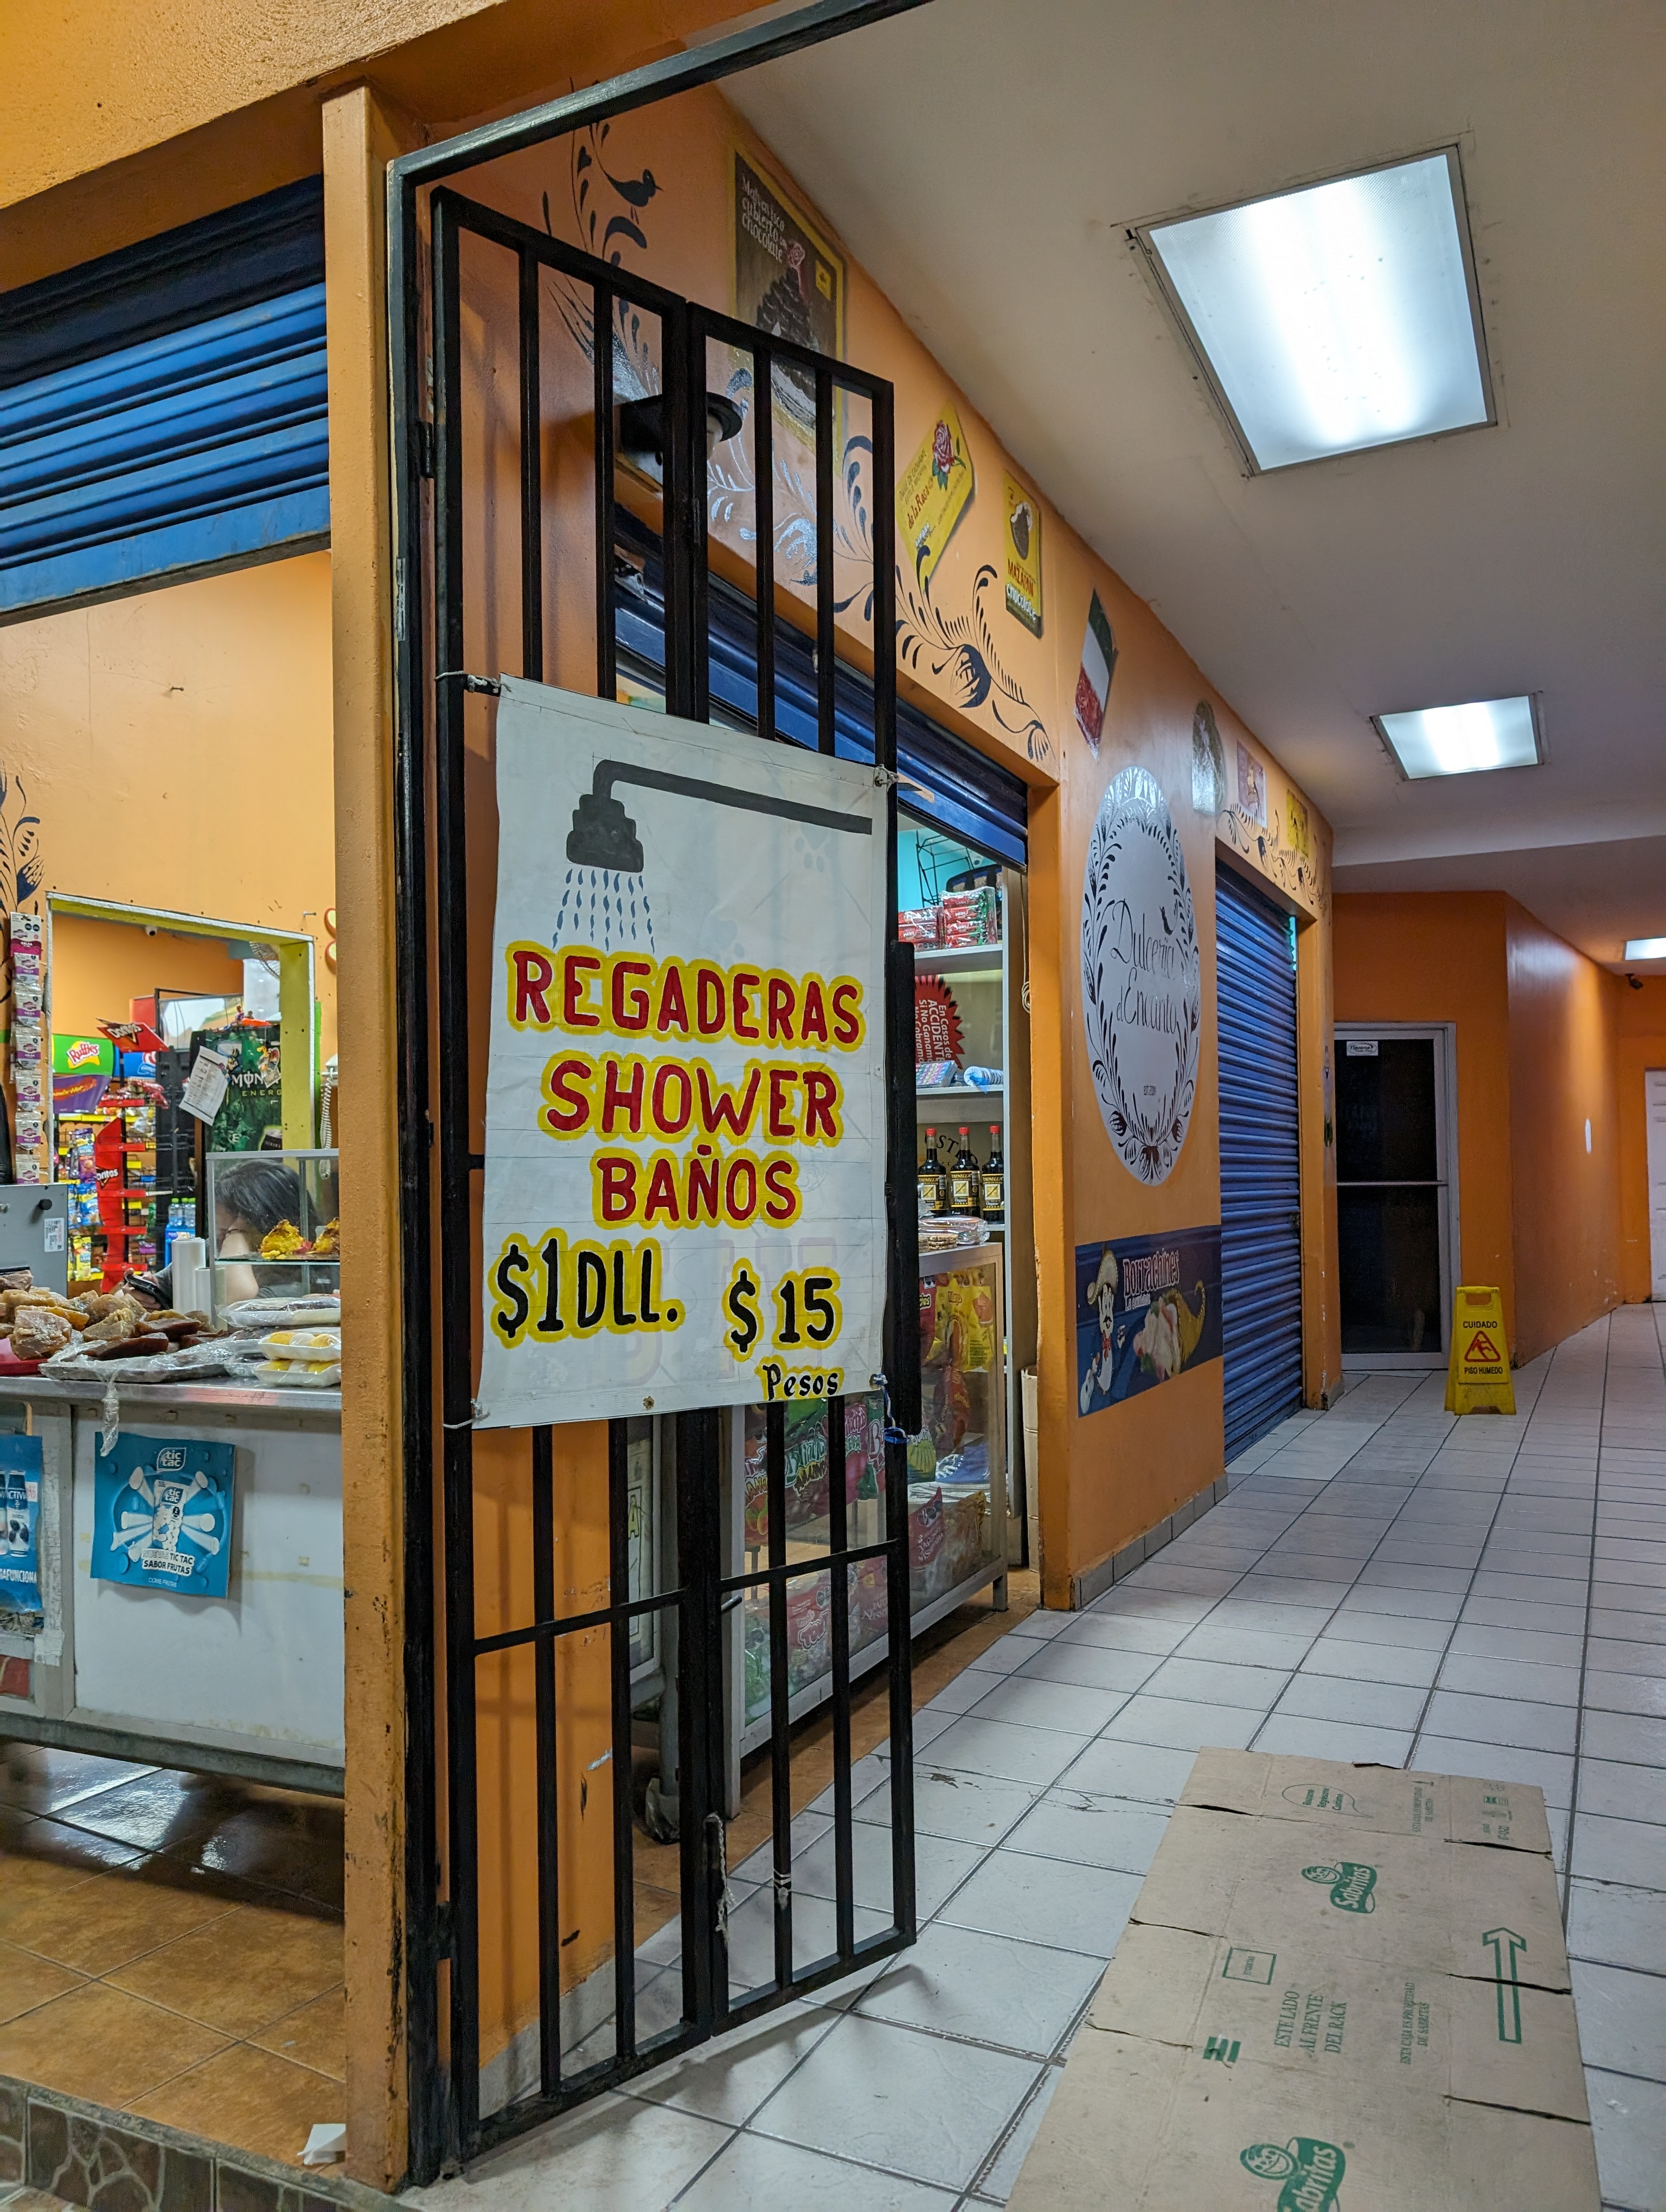 Sign for showers available in Tijuana at a cost of $1 or $15 pesos. 